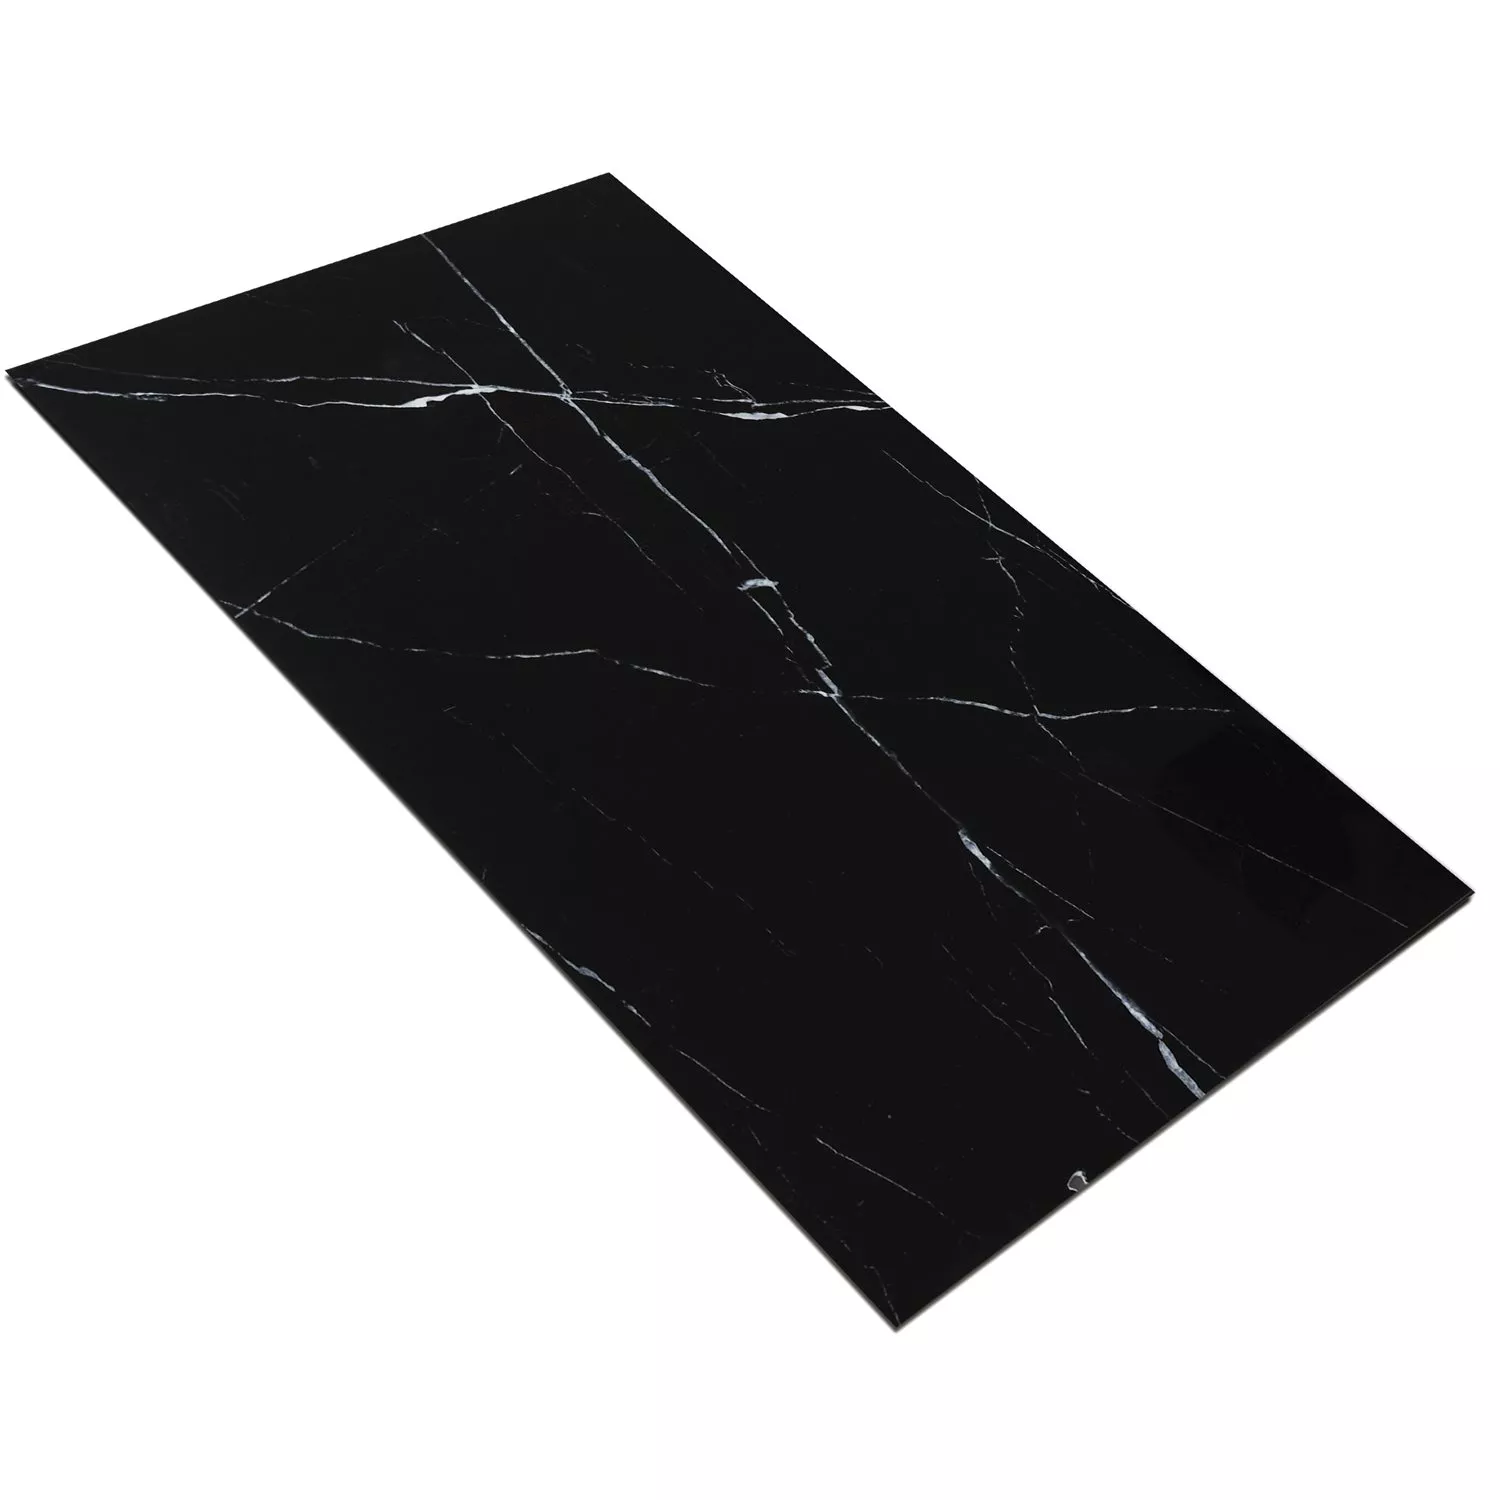 Sample Natural Stone Optic Tiles Discovery Nero 30x60cm